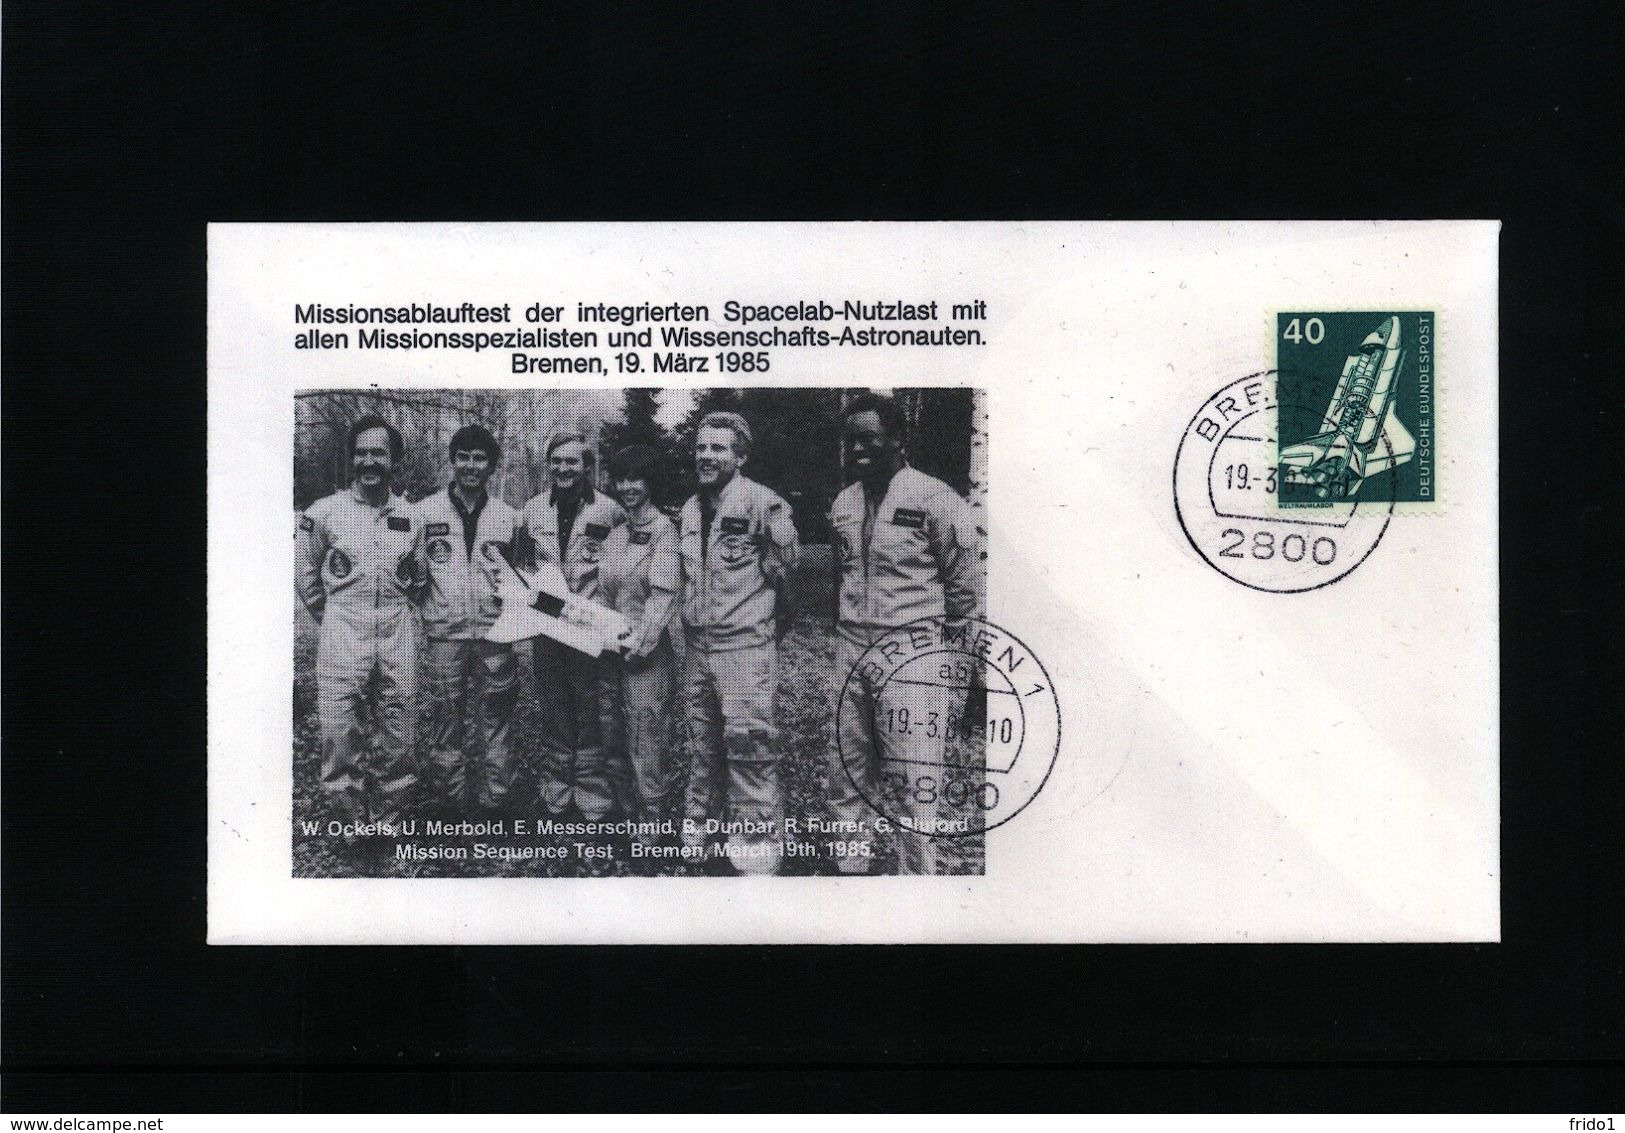 Germany 1985 US-German Spacelab Mission Crew Space / Raumfahrt Interesting Cover - Europe